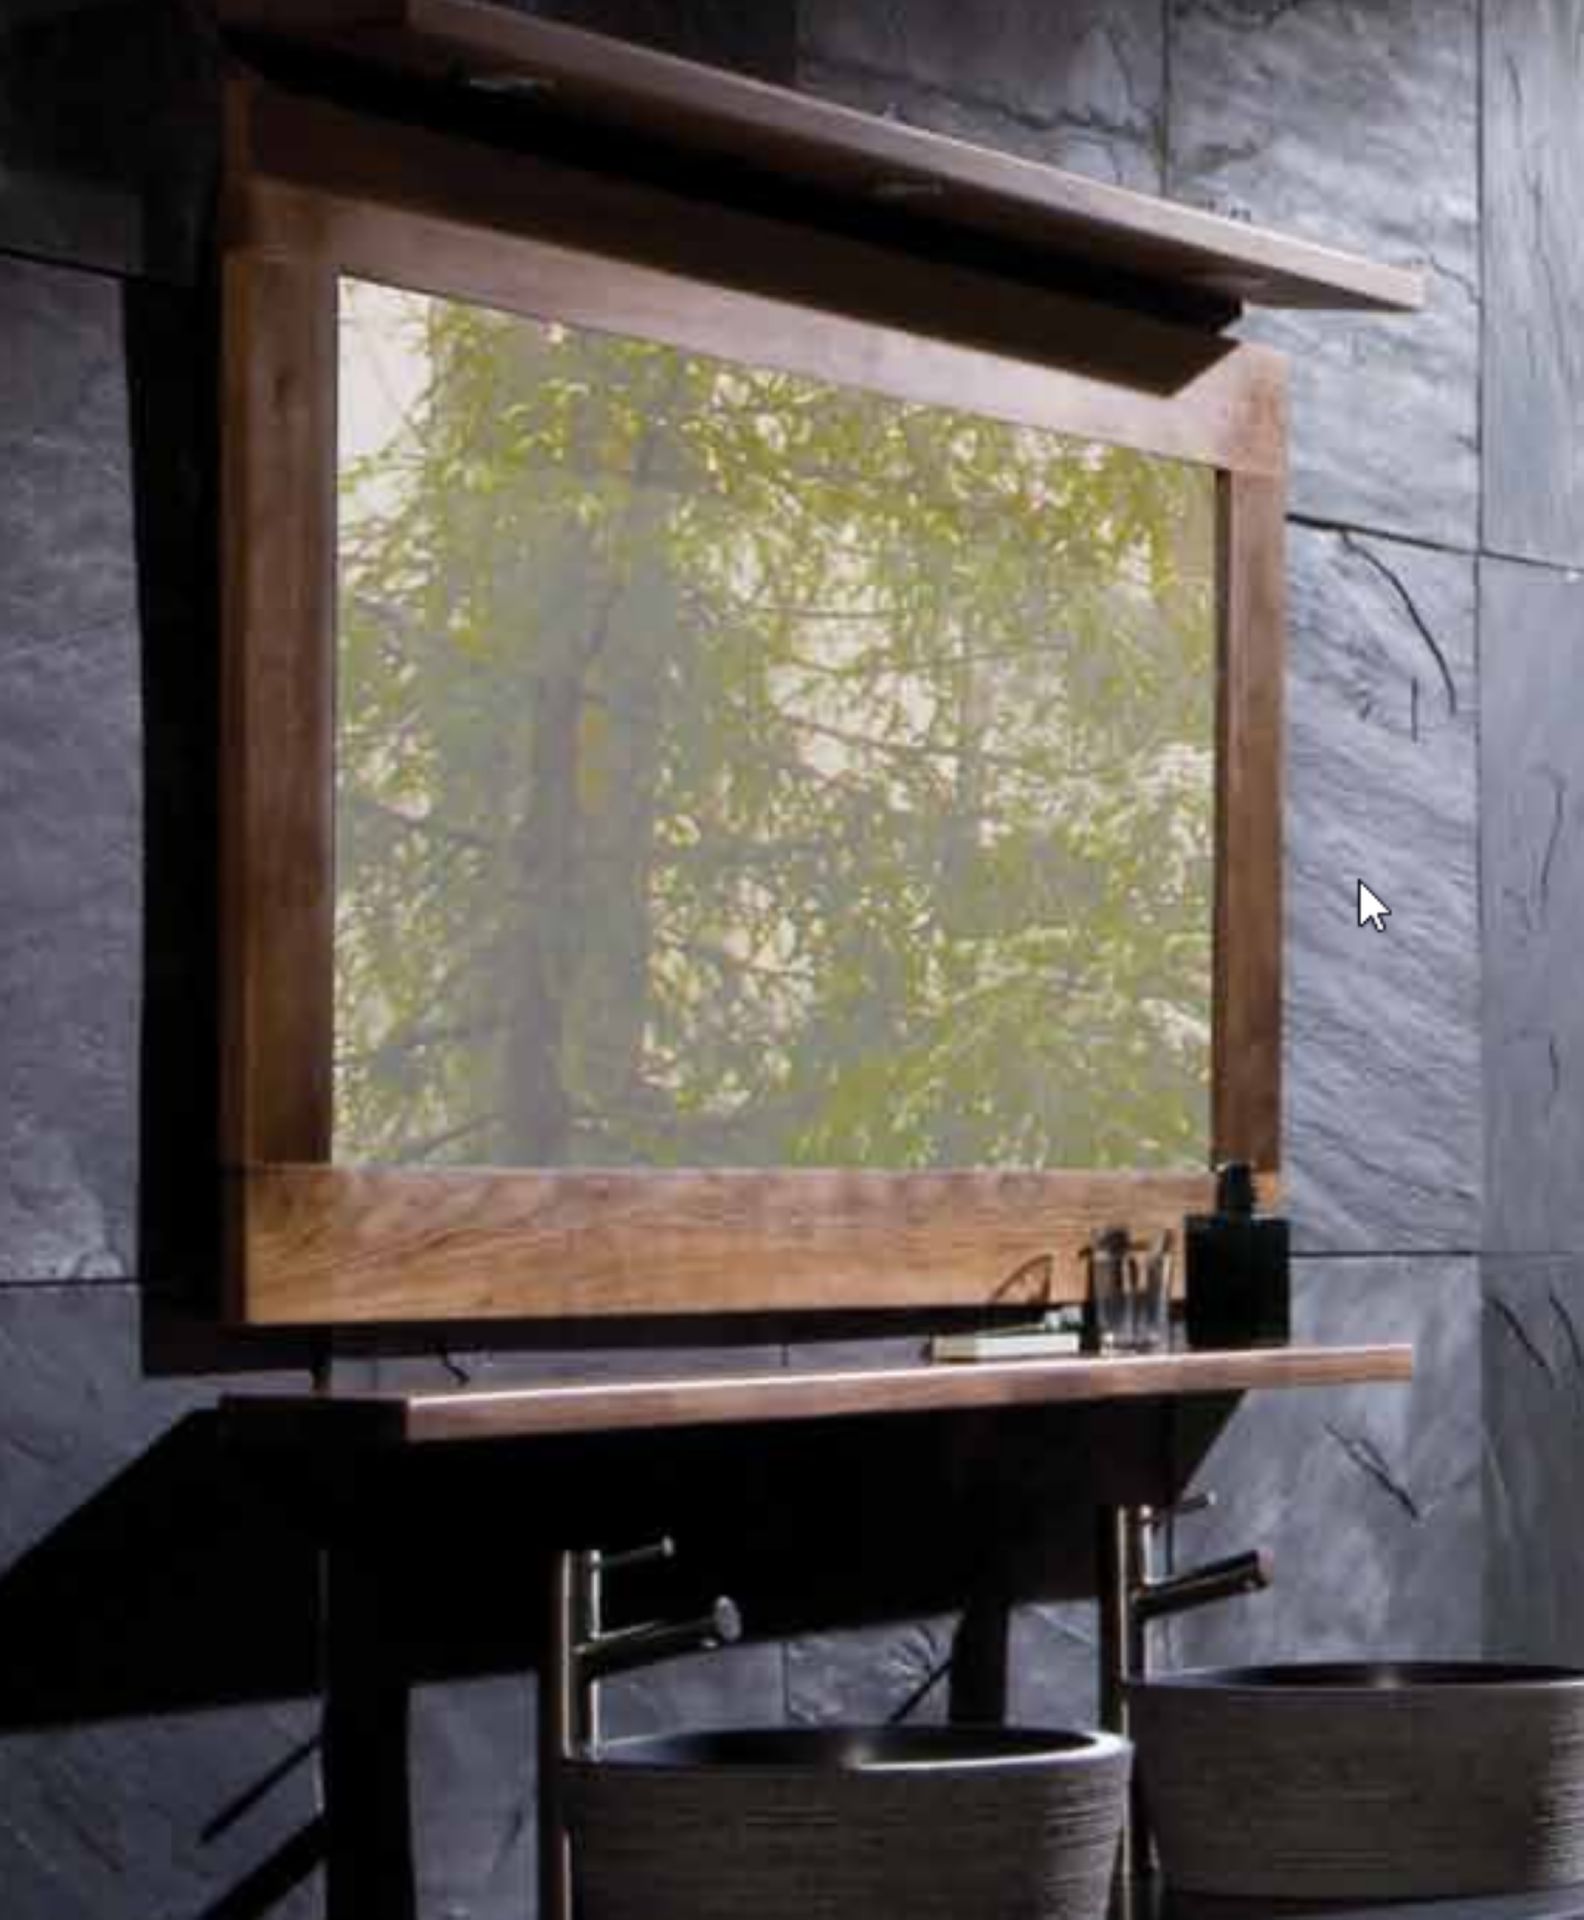 1 x Stonearth Bathroom Wall Mirror With Solid Walnut Frame and Bevelled Glass Mirror - Size: Large - Image 6 of 7